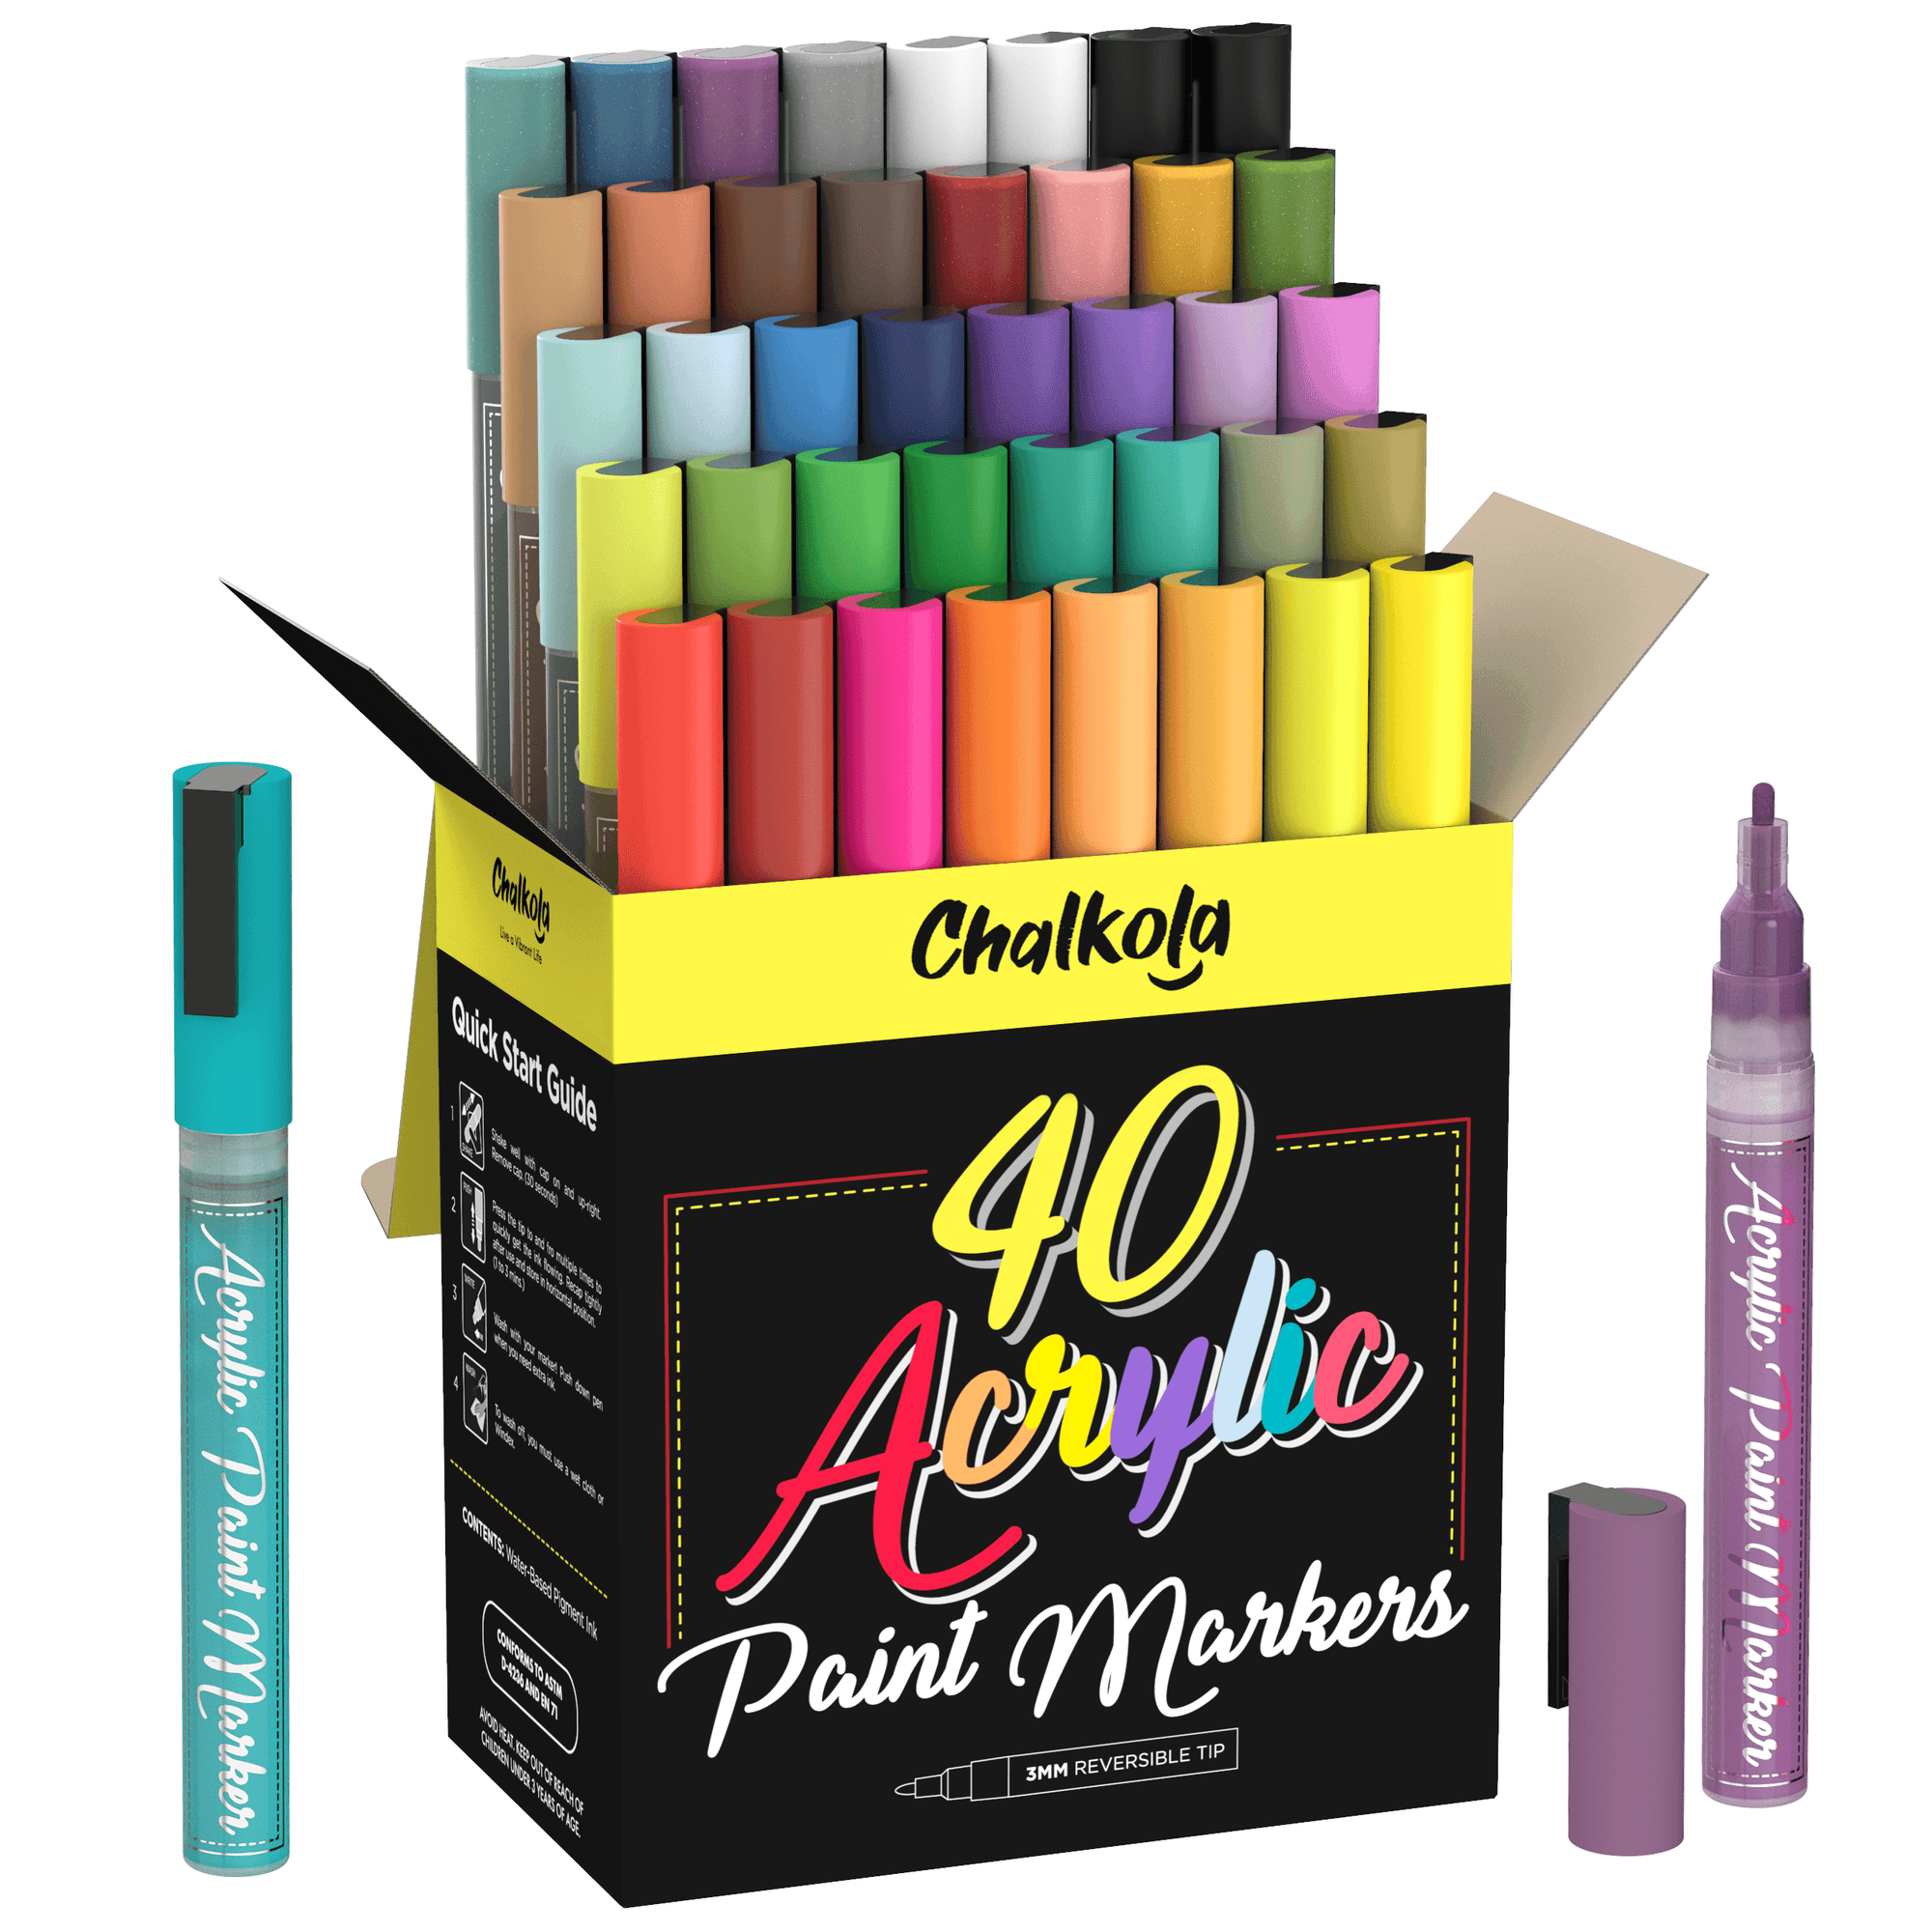 Acrylic Paint Marker Pens - Pack of 40, Fine Tip 